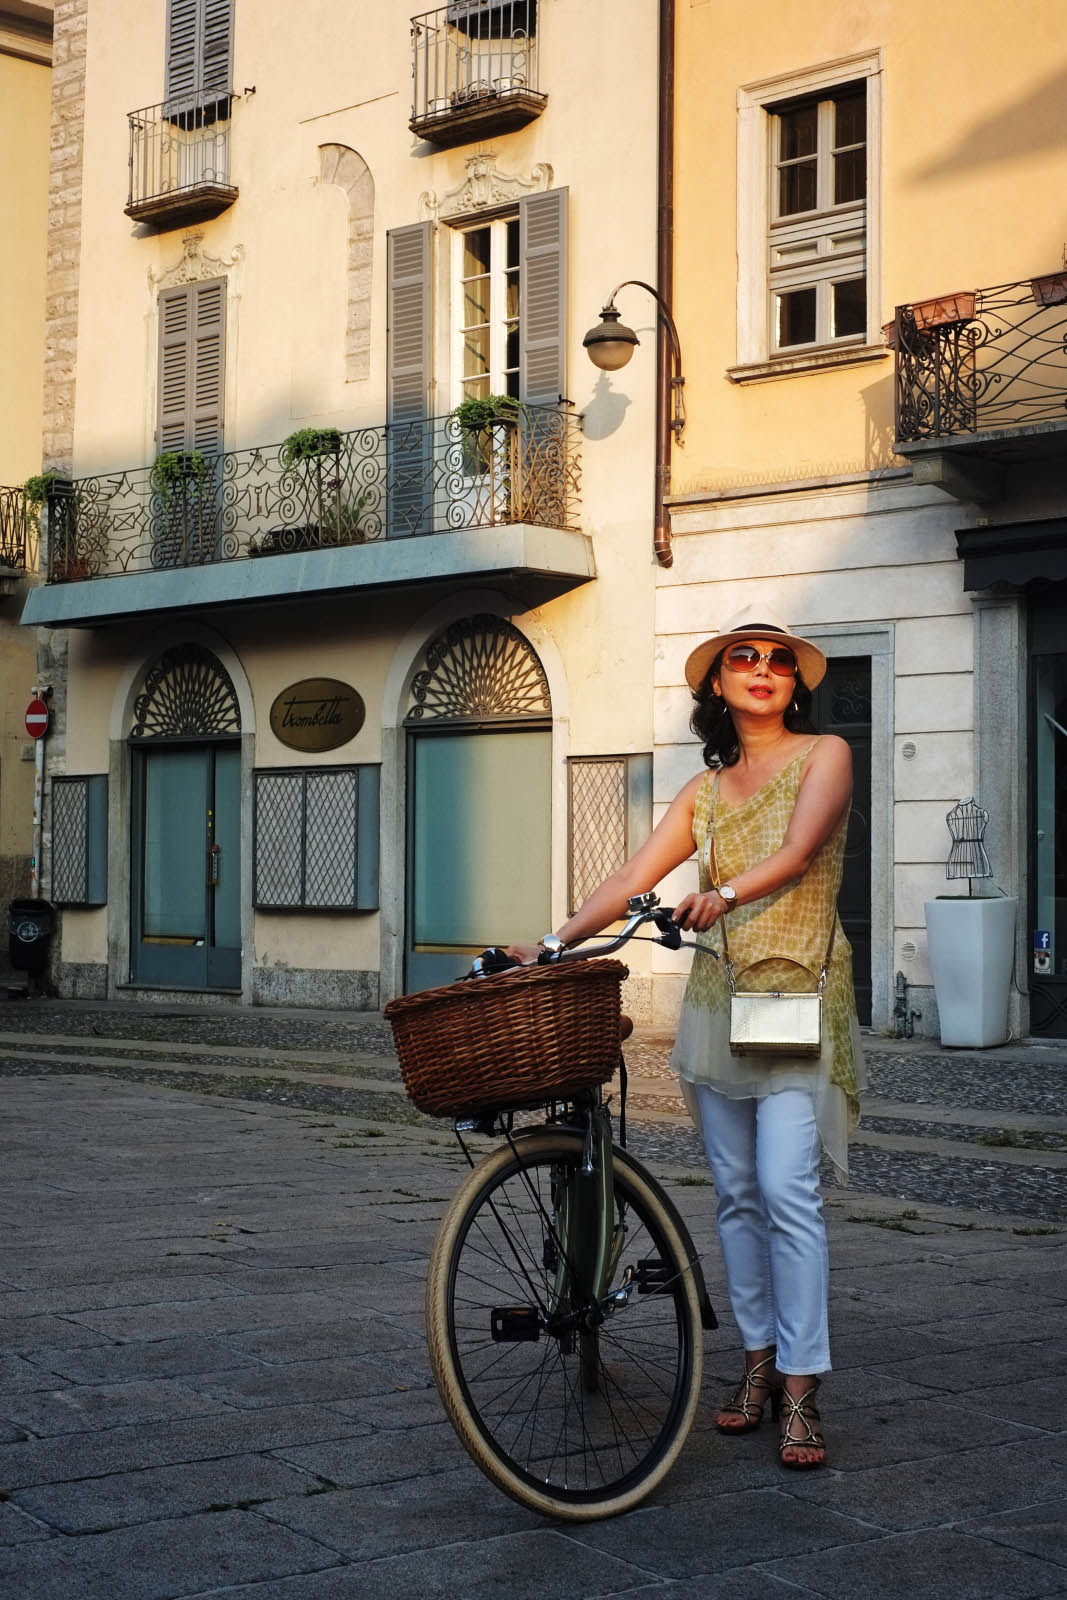 Woman with hotel bicycle in Como, Italy. Hotel and tourism photography by Kent Johnson at Hi-Fidelity 360.